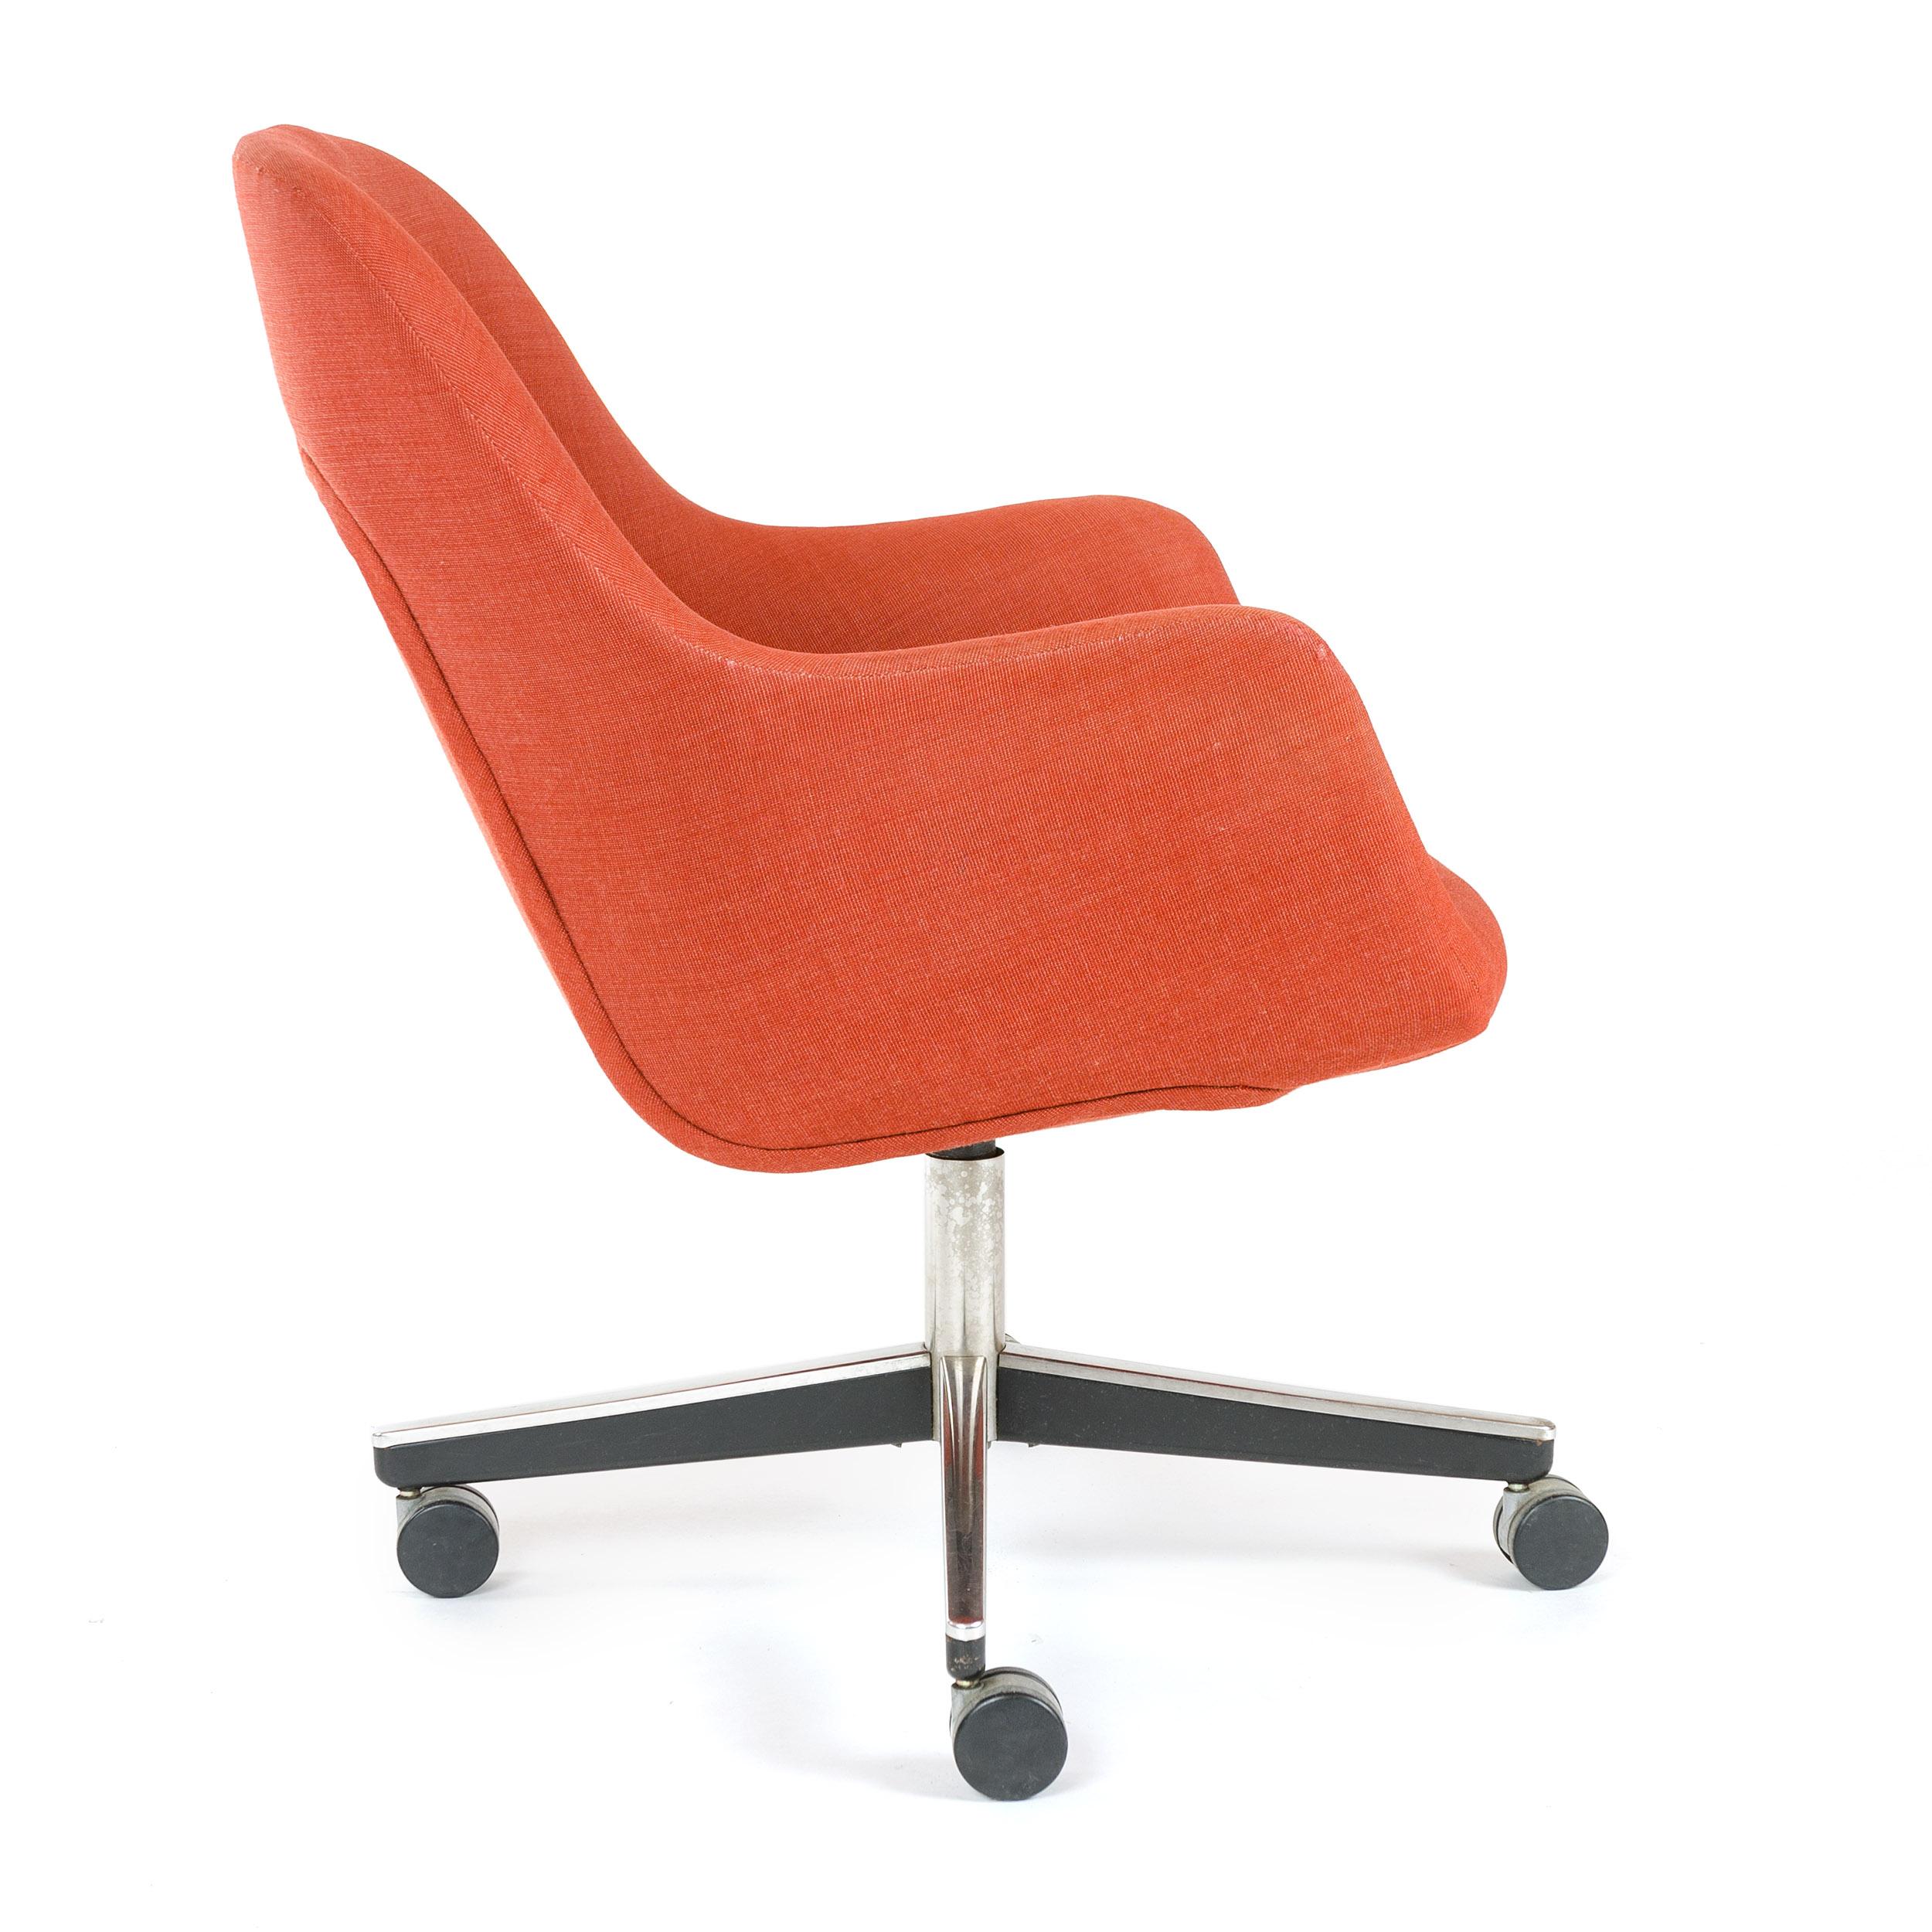 1970s chair